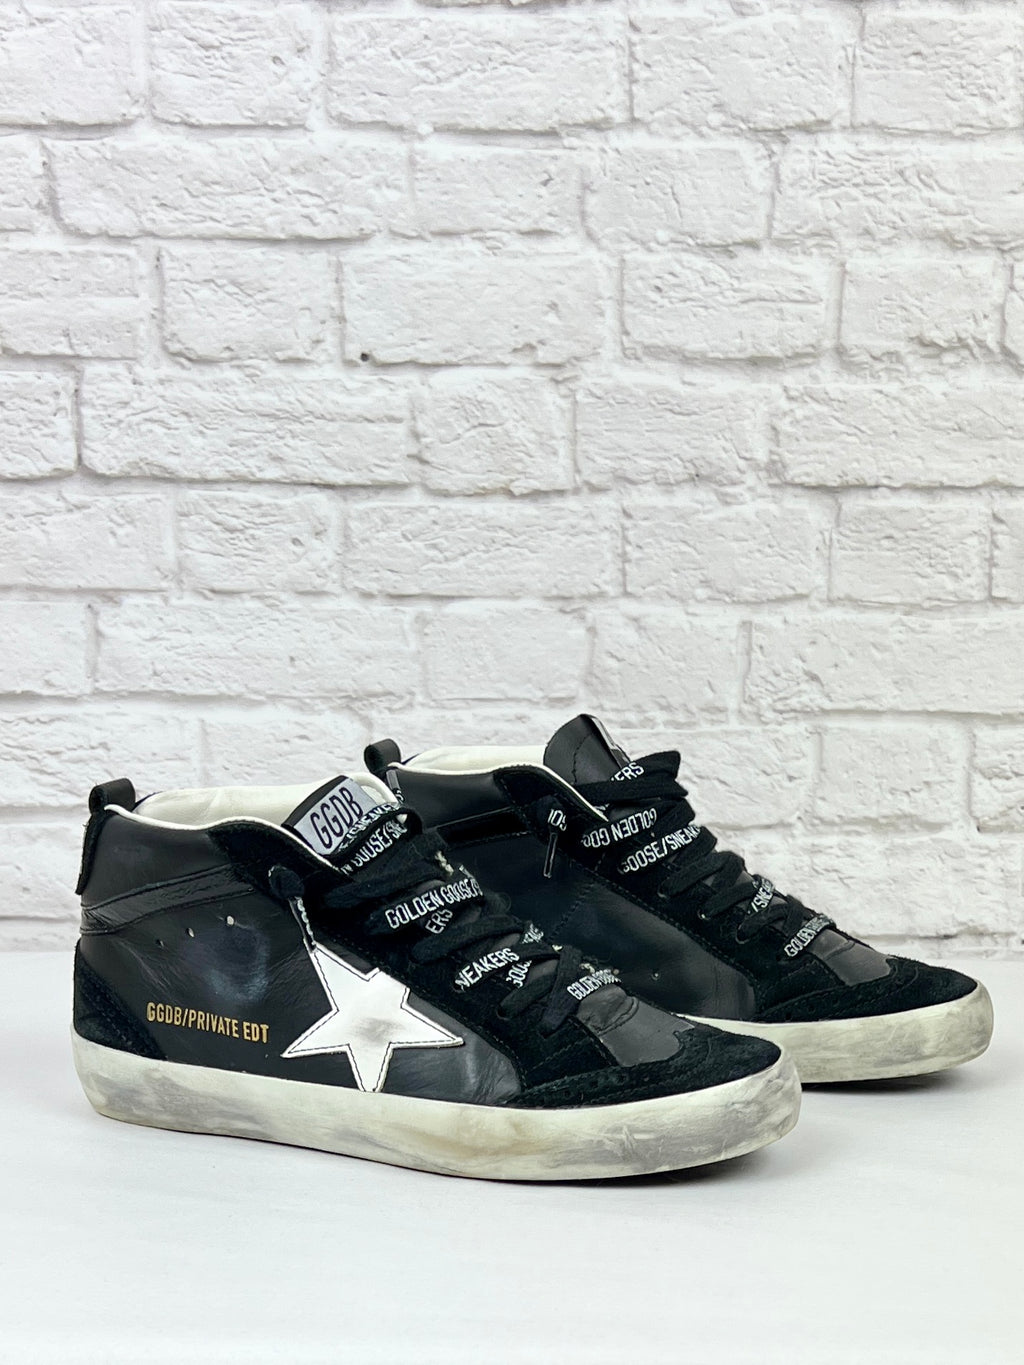 Golden Goose, Mid Star in Suede and Leather, Black, Size 7